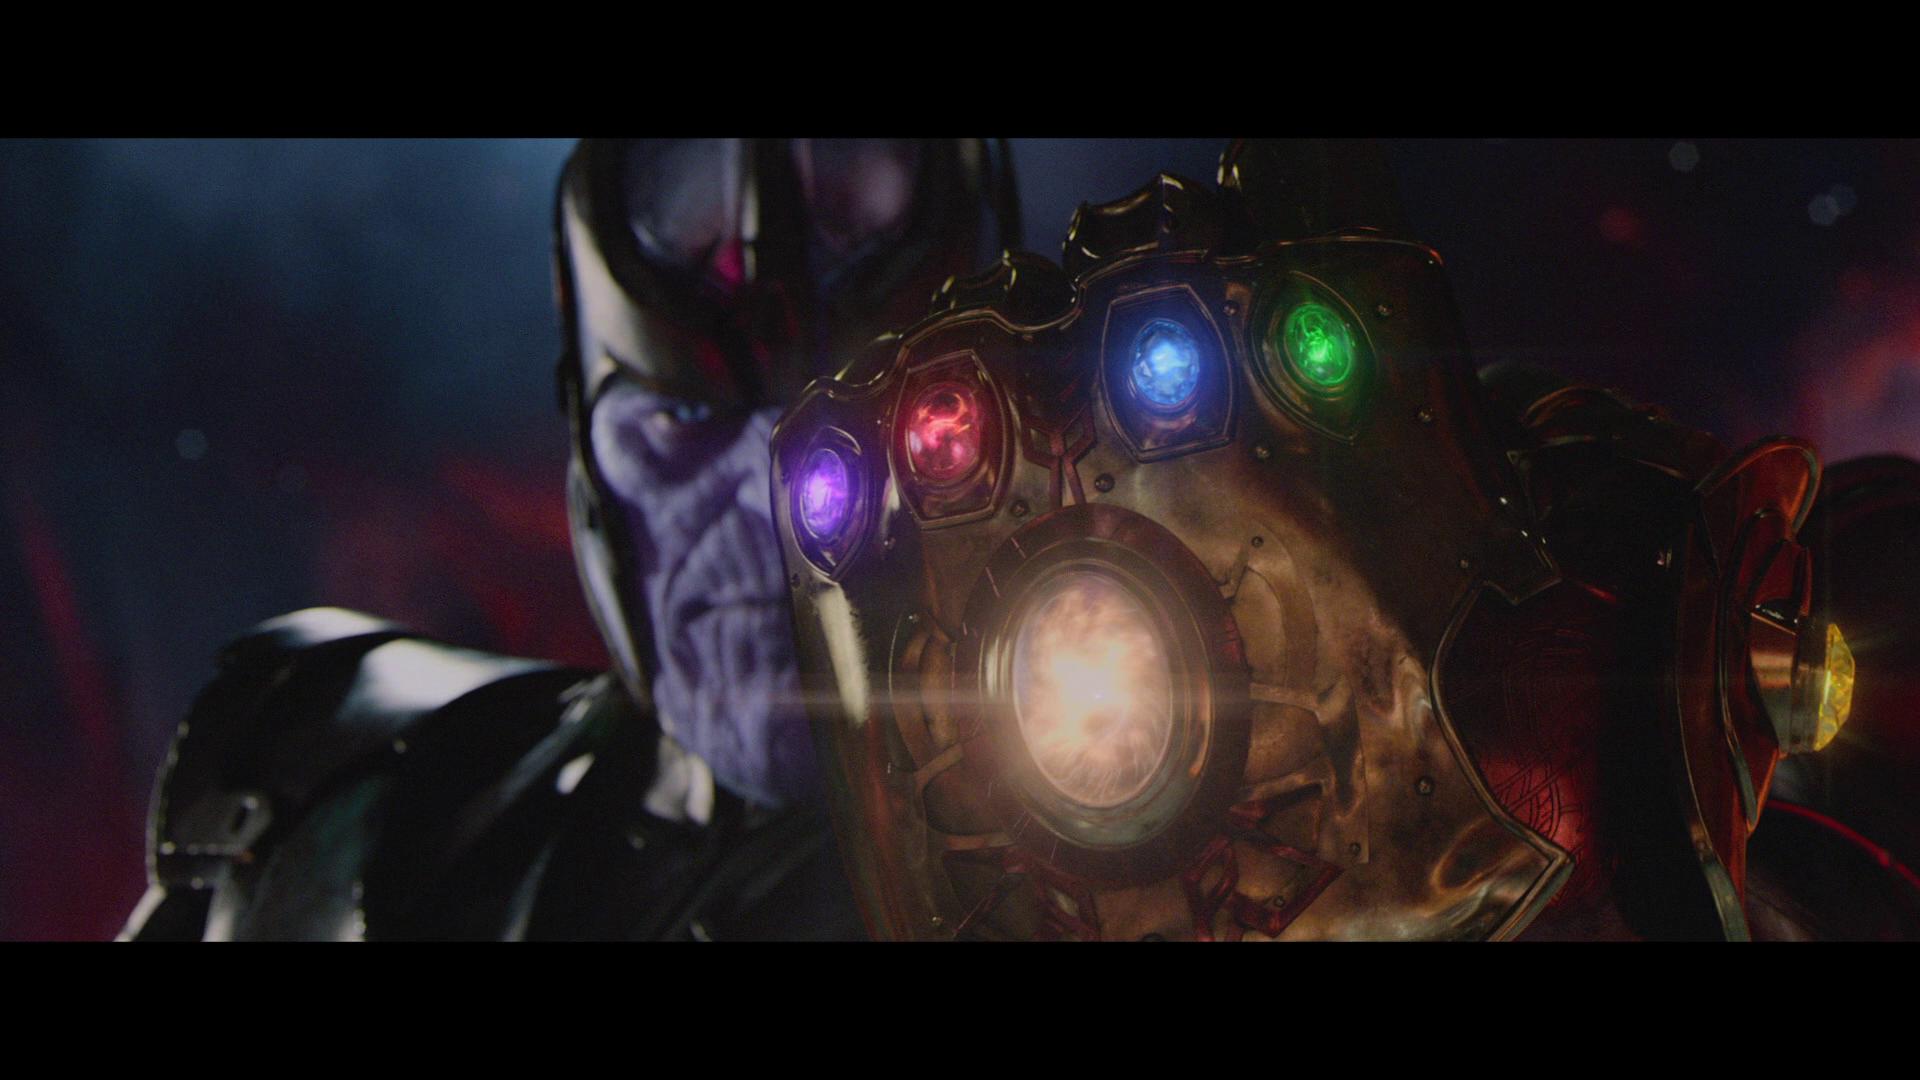 List Of Every Marvel Character That Has Been Confirmed For Avengers Infinity War